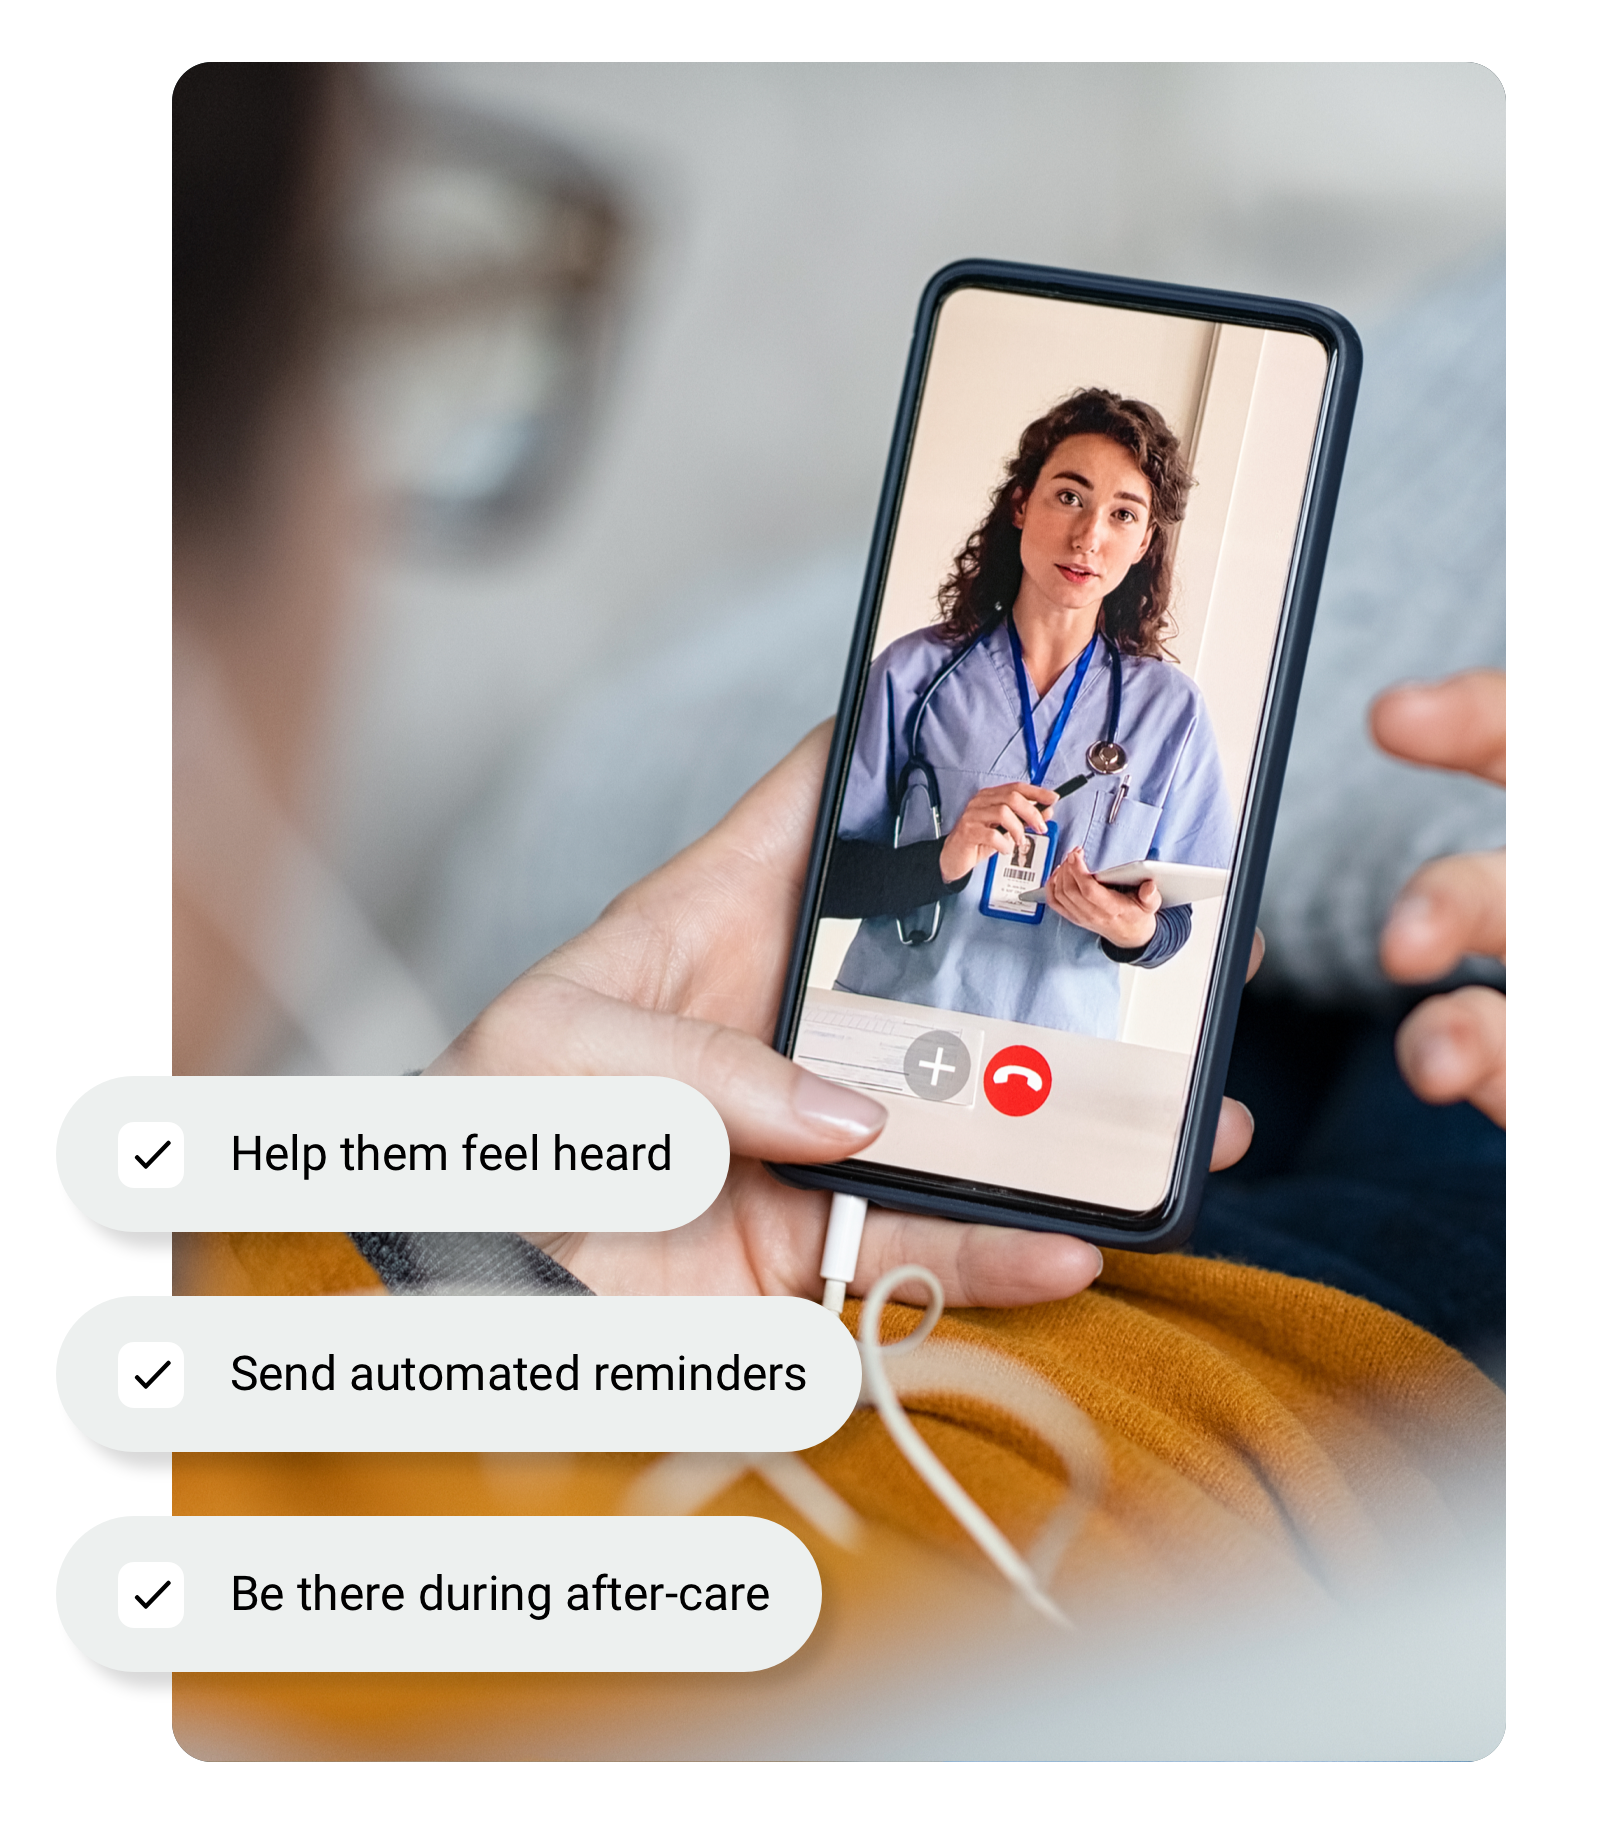 Healthcare professional using the RingCentral app to enhance care and collaborate better